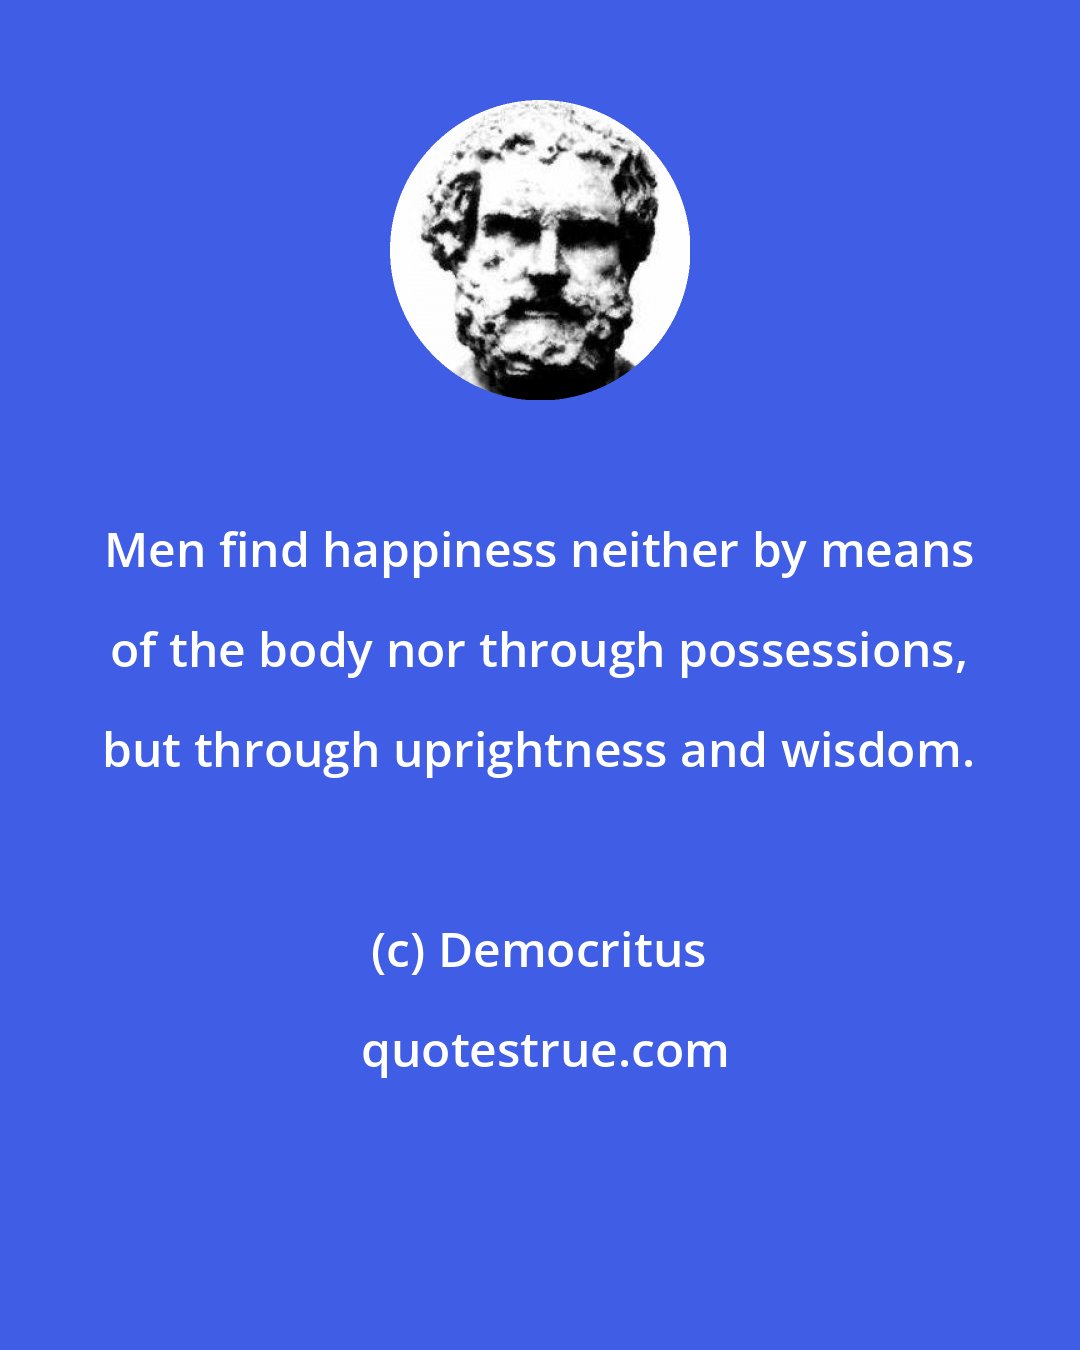 Democritus: Men find happiness neither by means of the body nor through possessions, but through uprightness and wisdom.